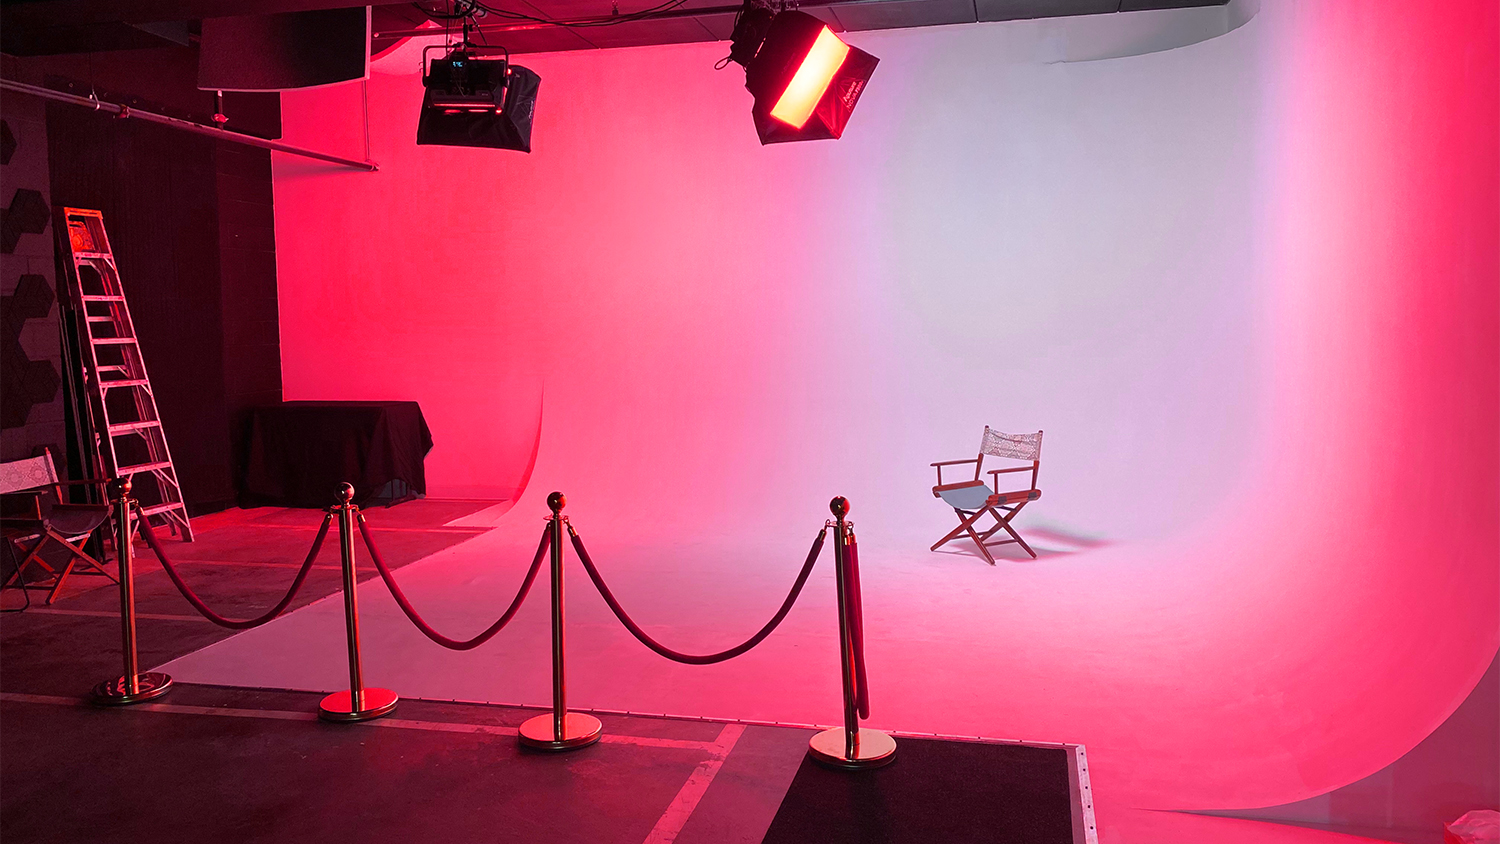 Cyc wall, cyclorama wall. or also known as infinity wall lights up in pink at Rockstoria Studios MN Minnesota Rental